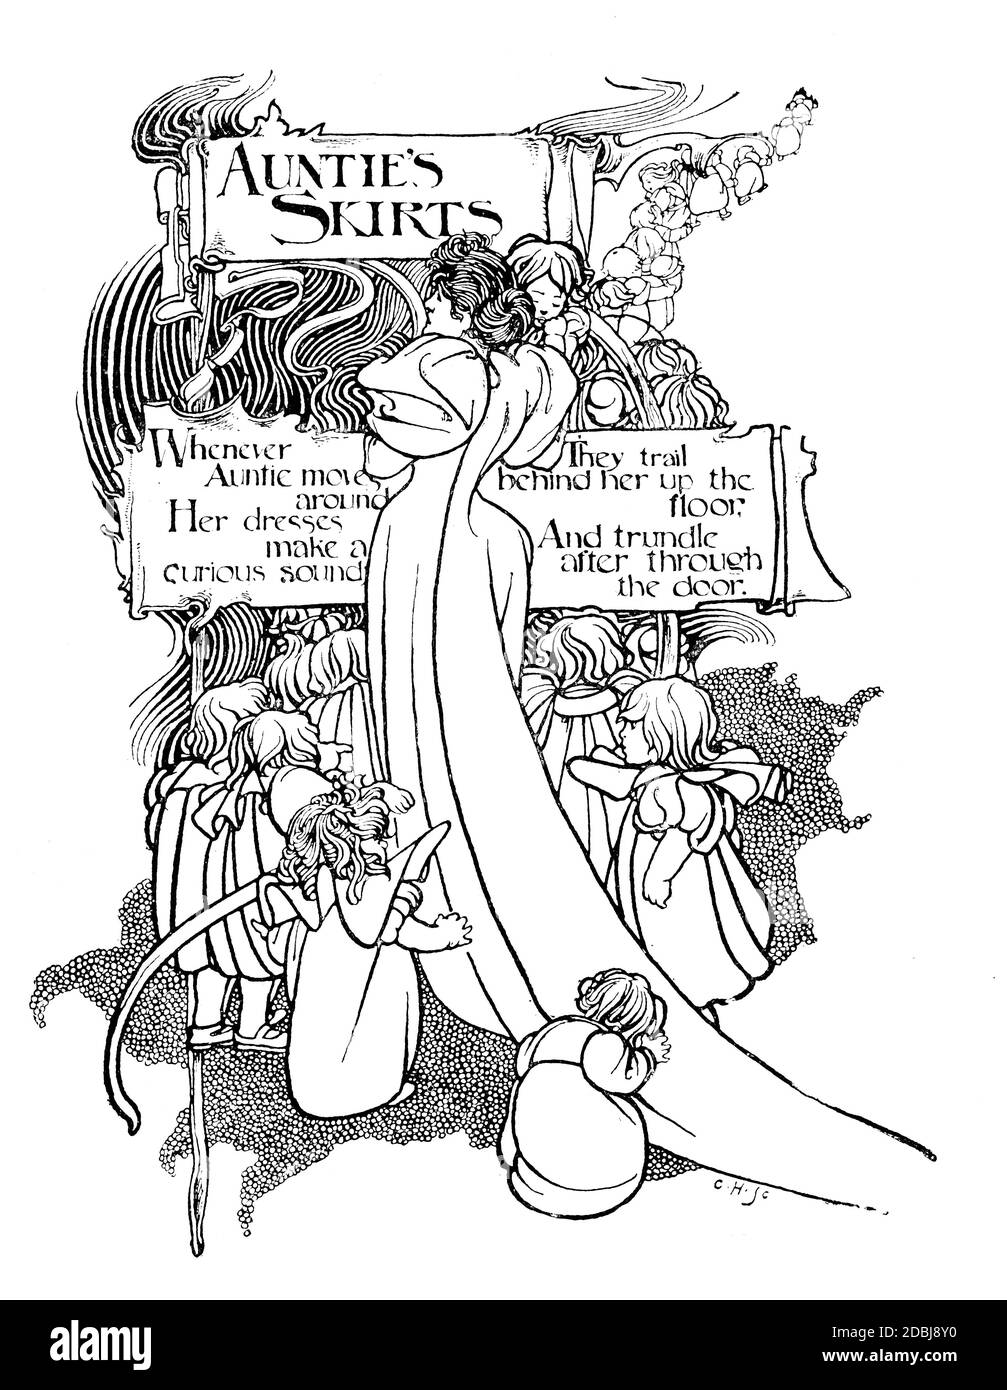 Auntie’s Skirts, The Child’s Garden of Verse, illustrazione di Charles Robinson, dal 1896 The Studio An Illustrated Magazine of fine and Applied Foto Stock